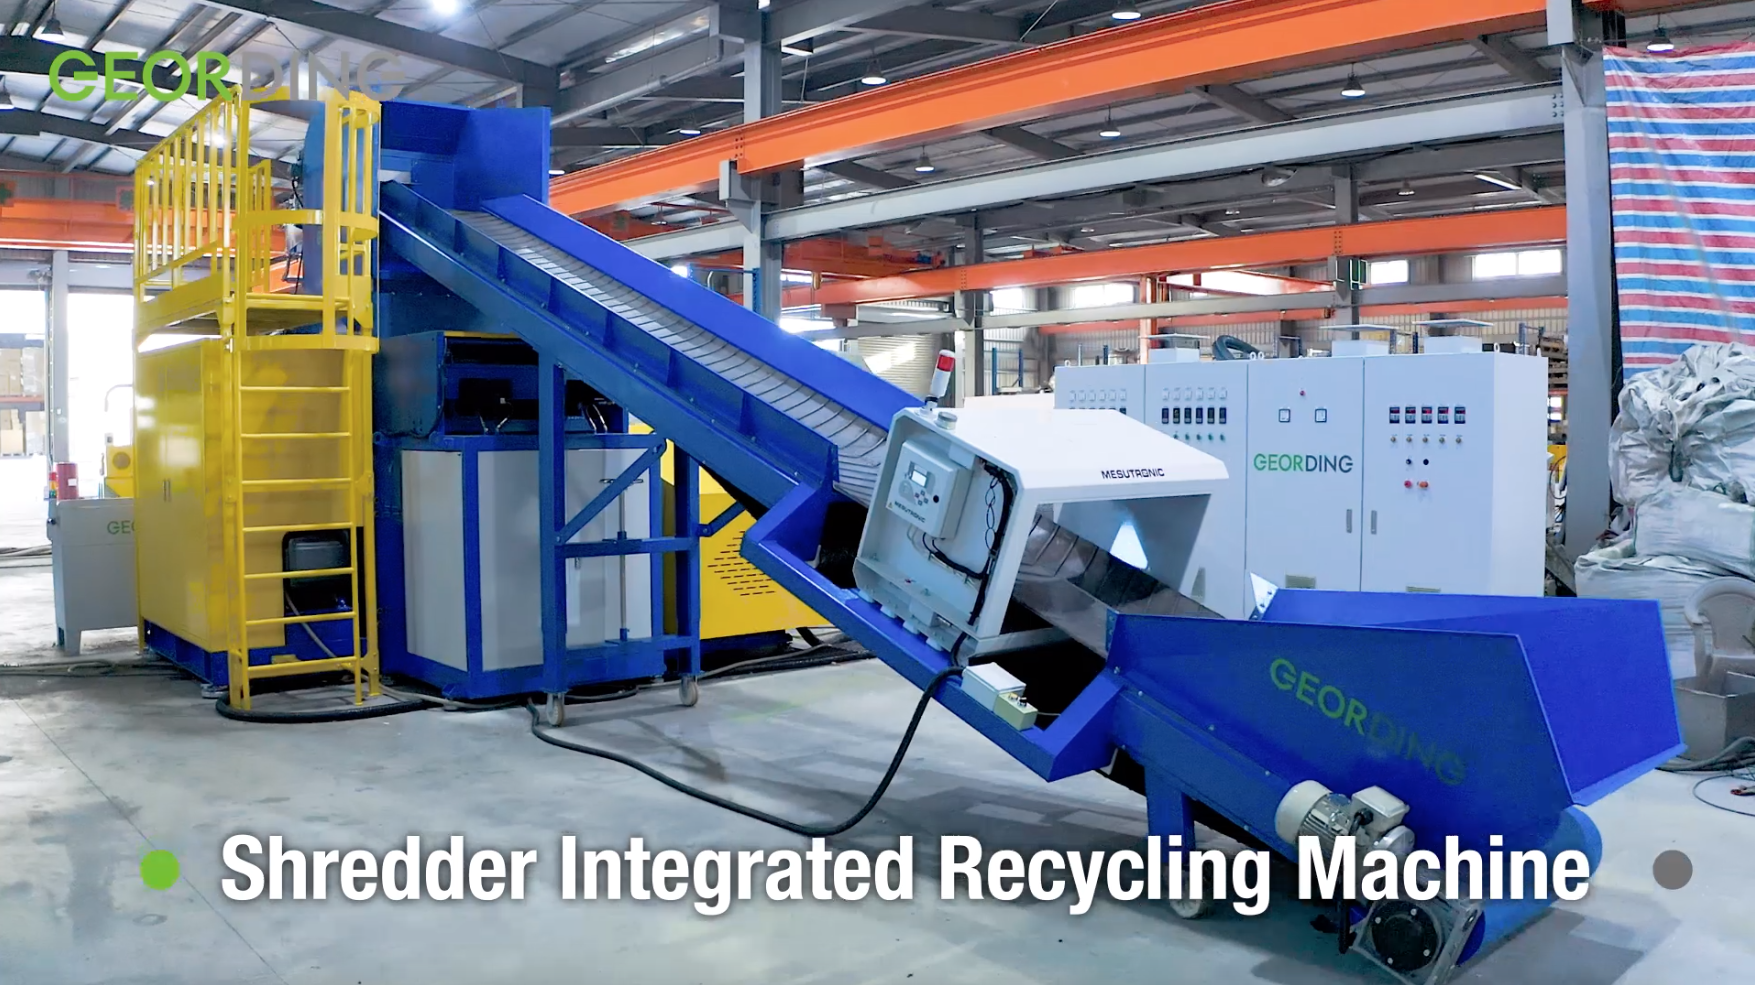 Shredder Integrated Recycling Machine